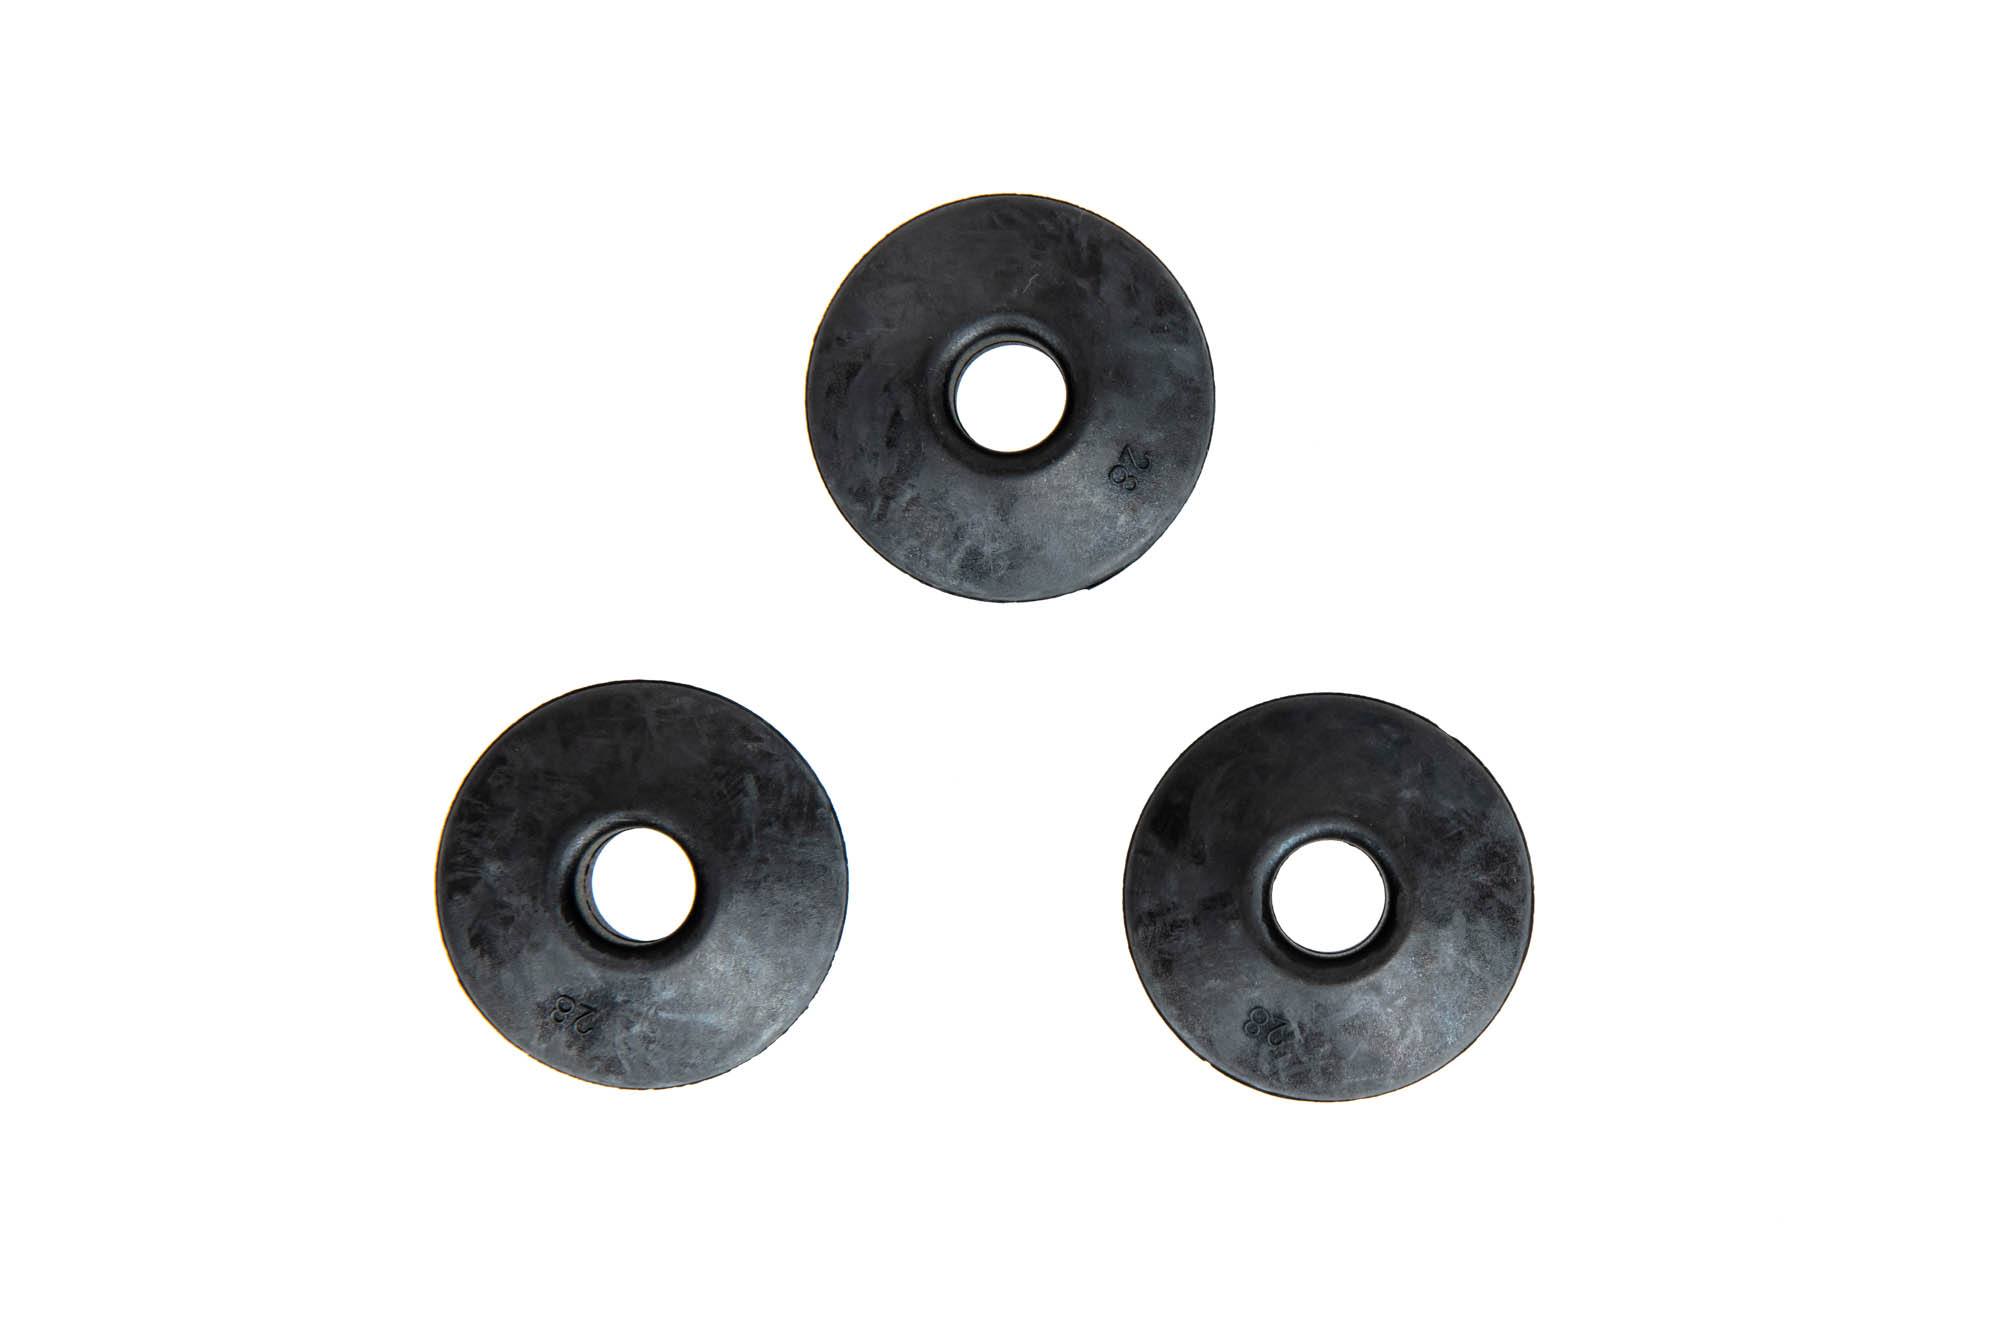 Set of 3 CBX Barrel Spacers by Silverback Airsoft on Airsoft Mania Europe